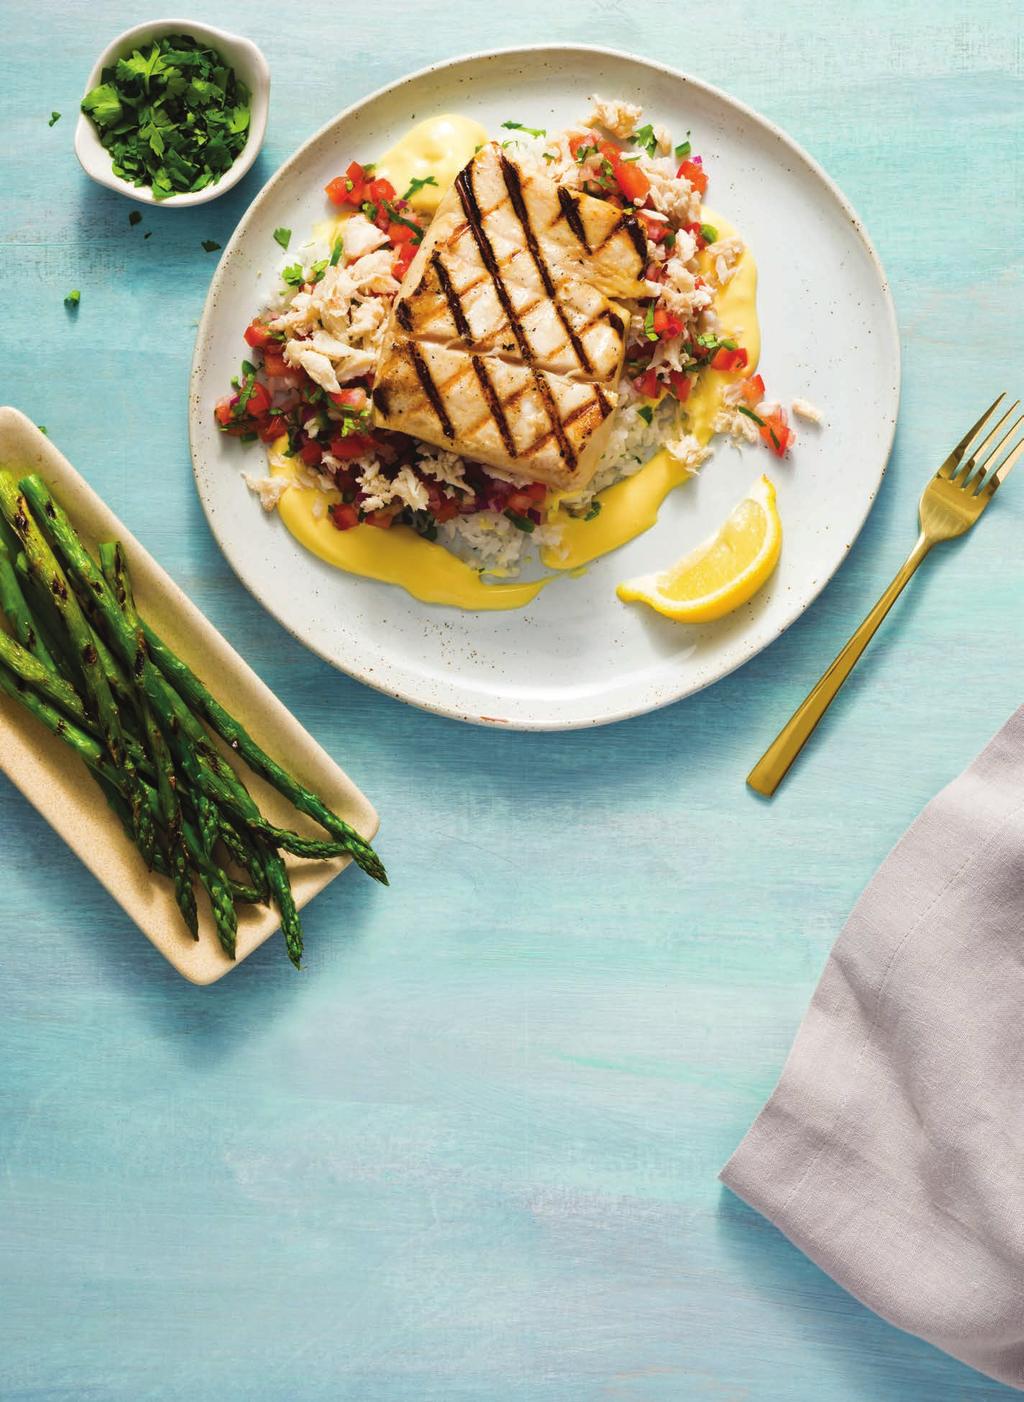 Grilled Halibut by sea Straight from the sea and